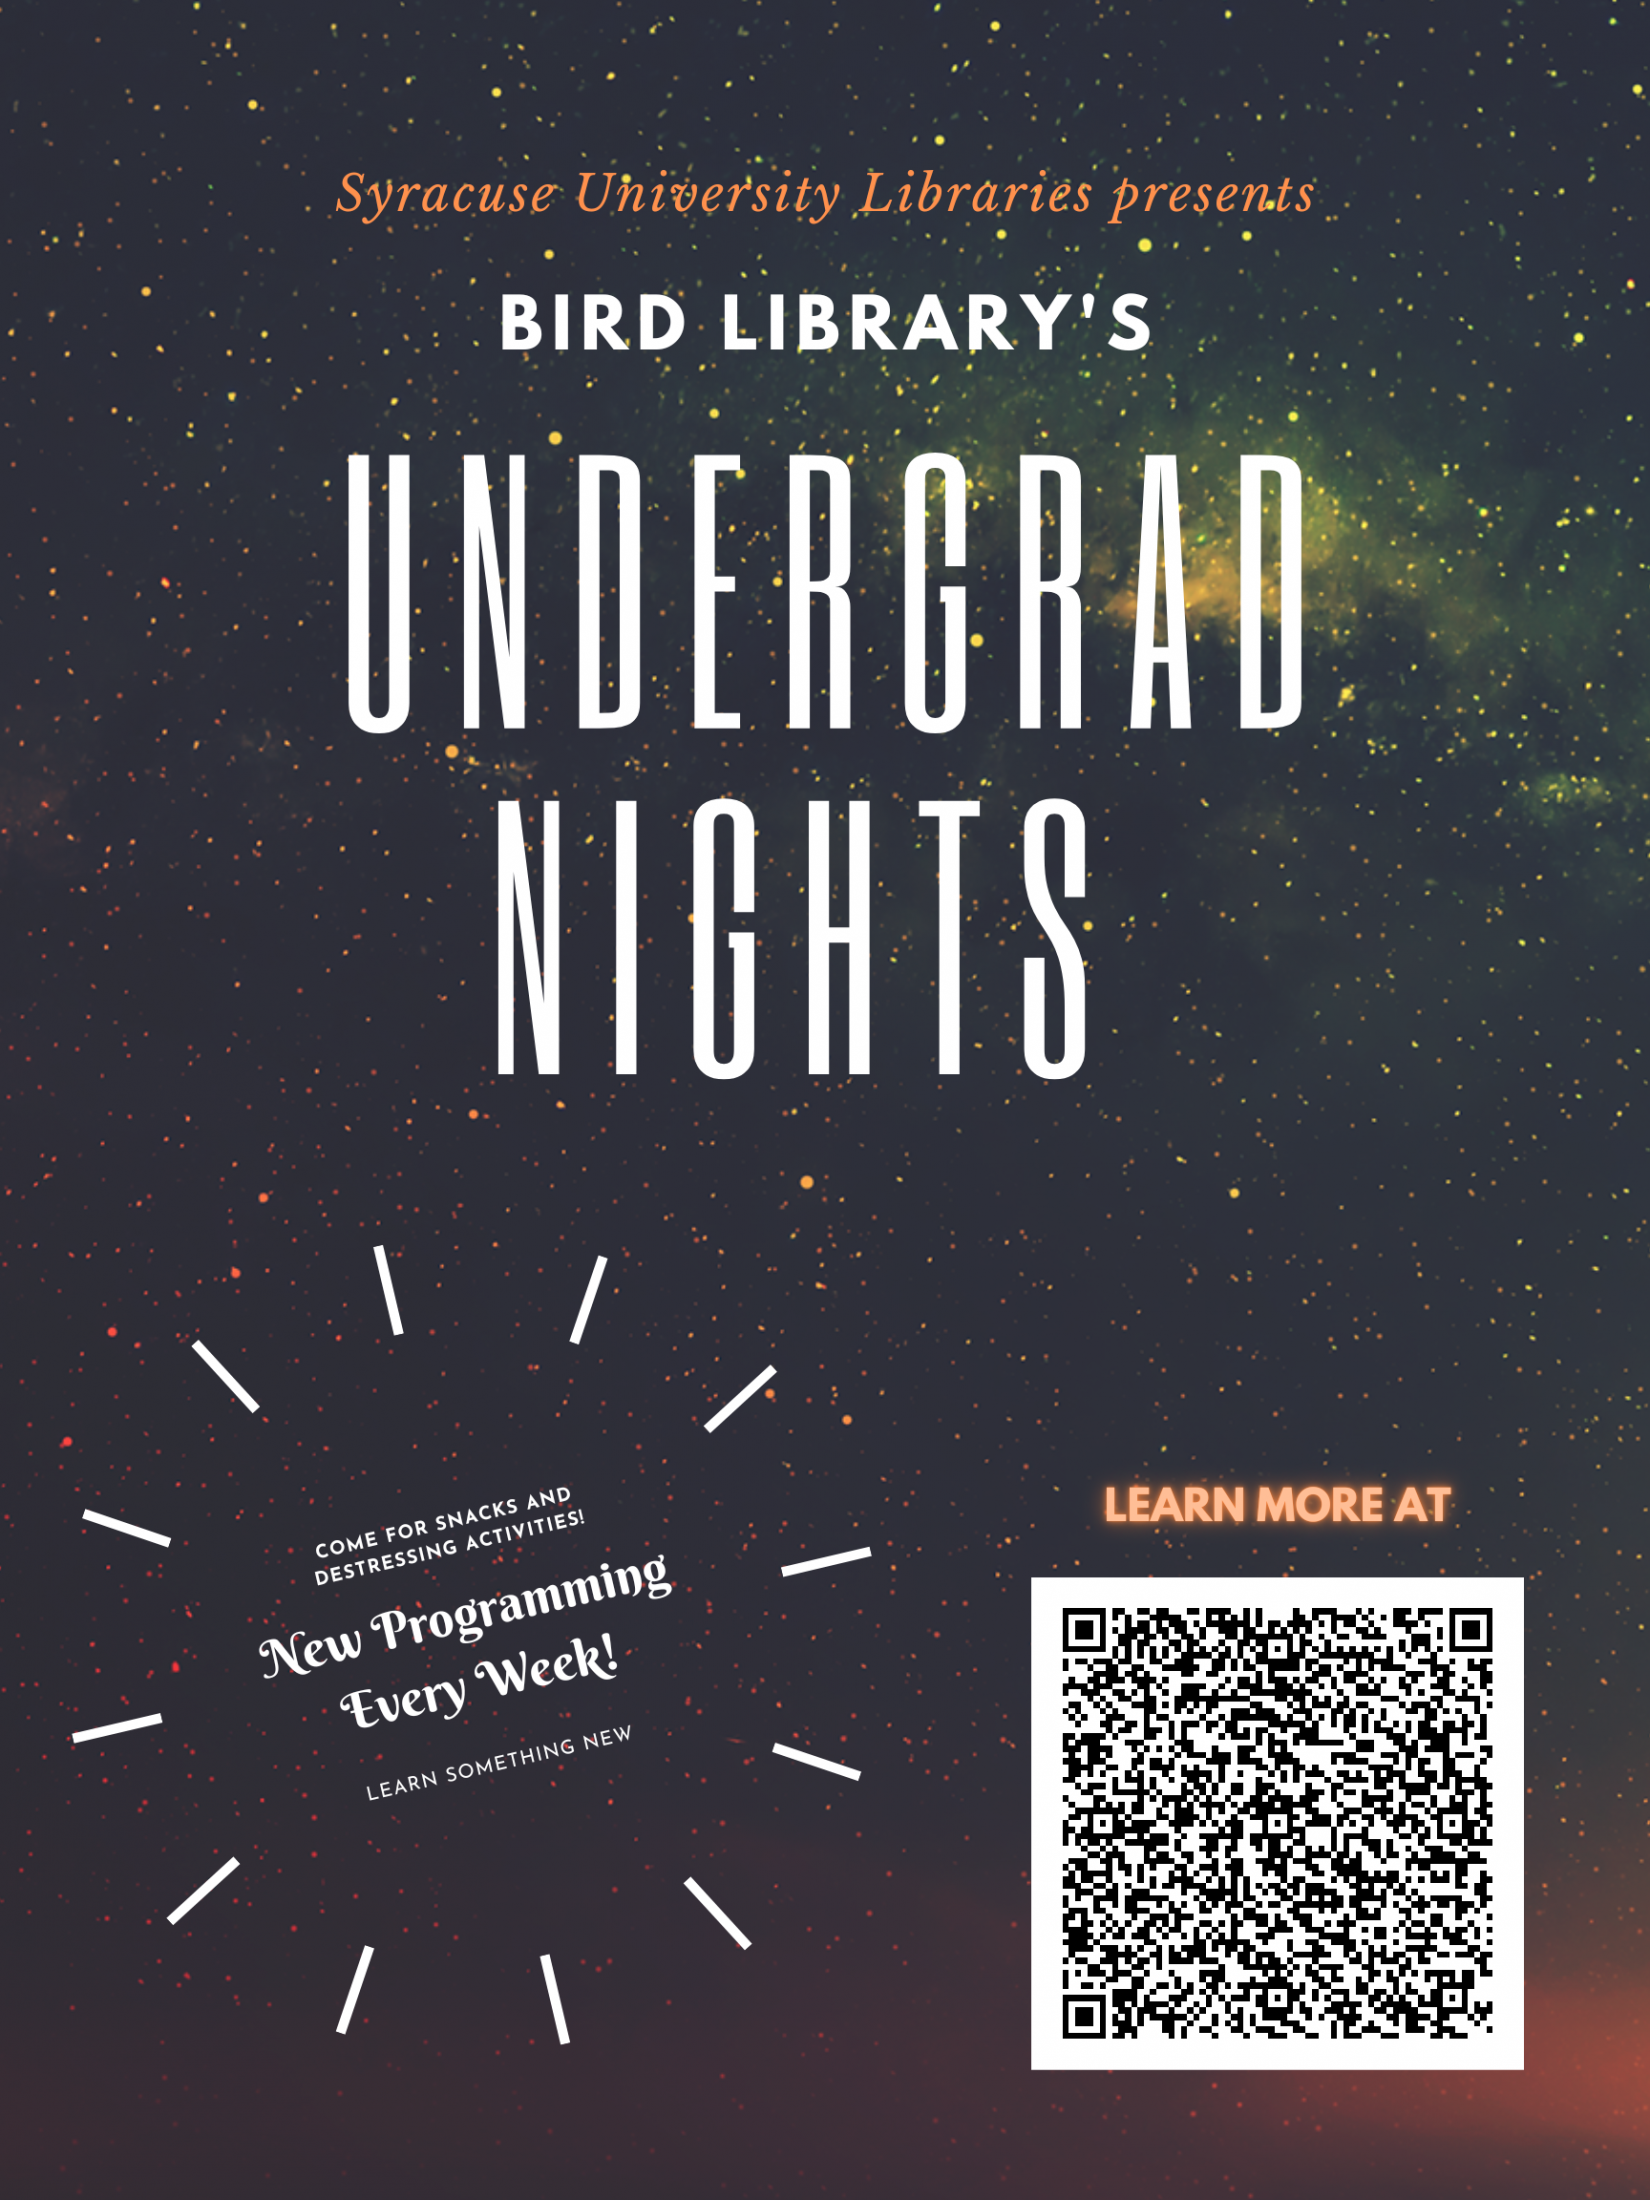 black background with stars and words "Undergrad Nights" and QR code to research guide